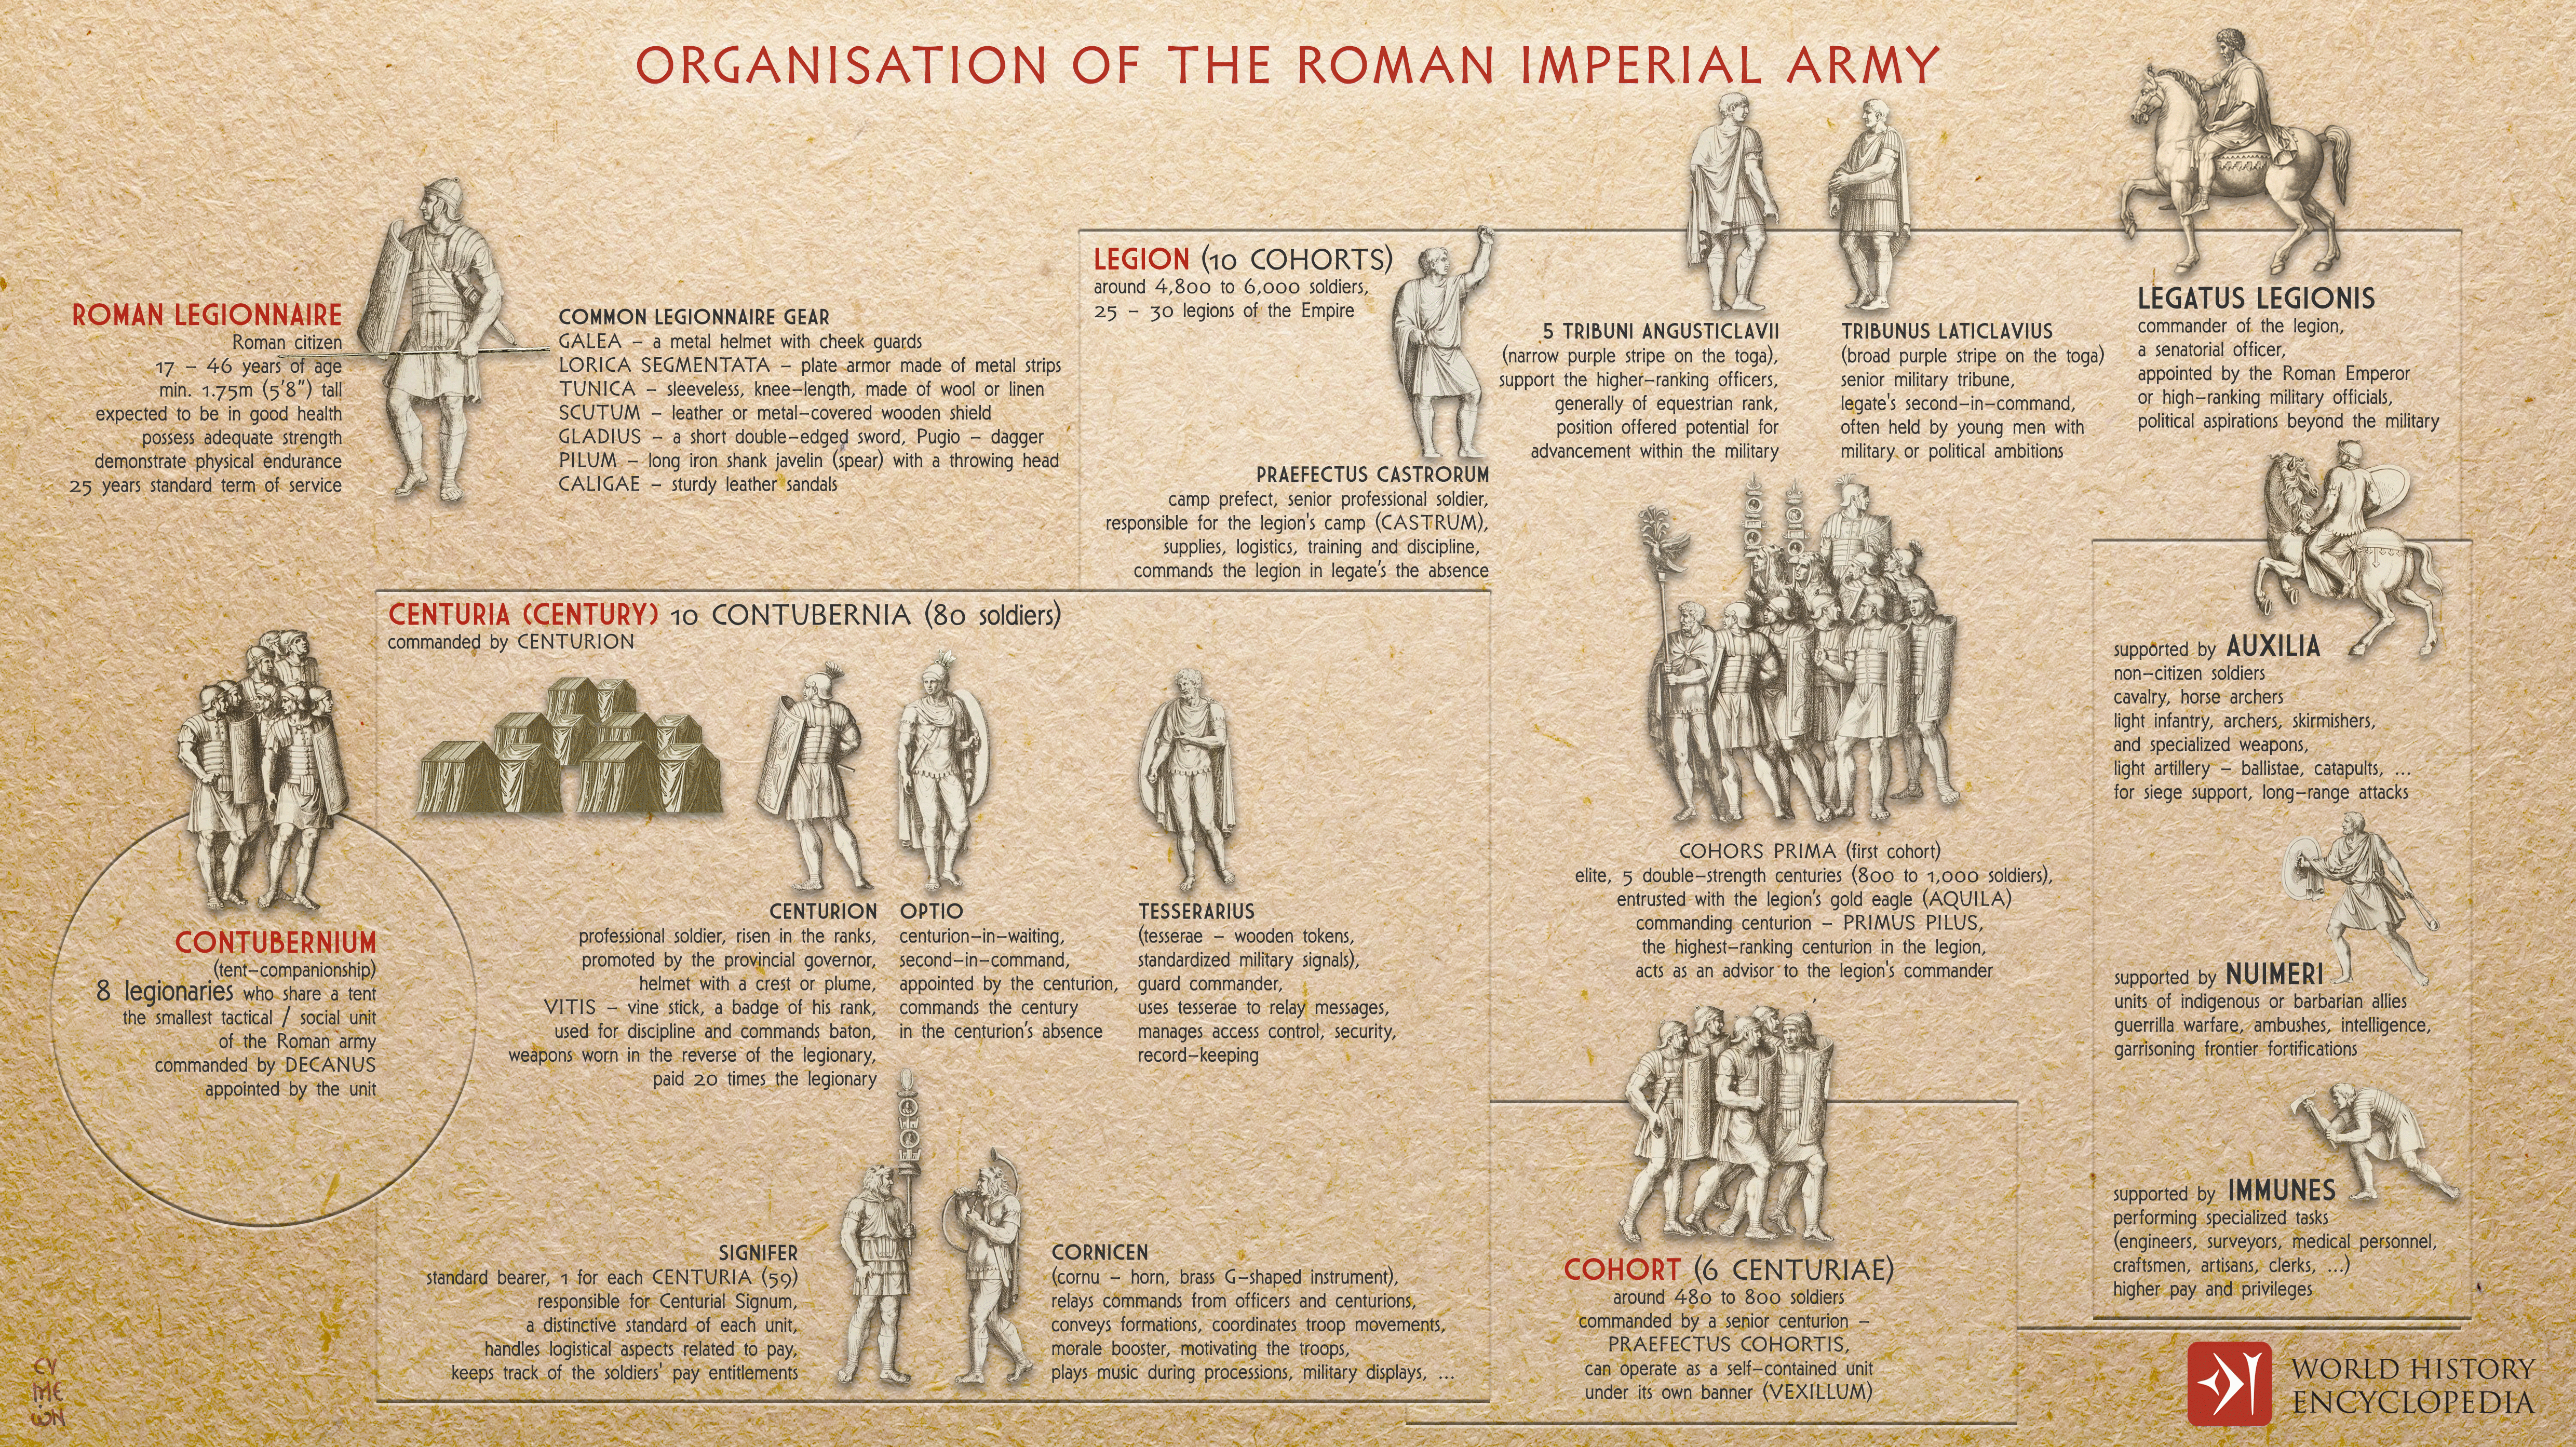 The Order of the Centurion Organization in The World of the Centurions